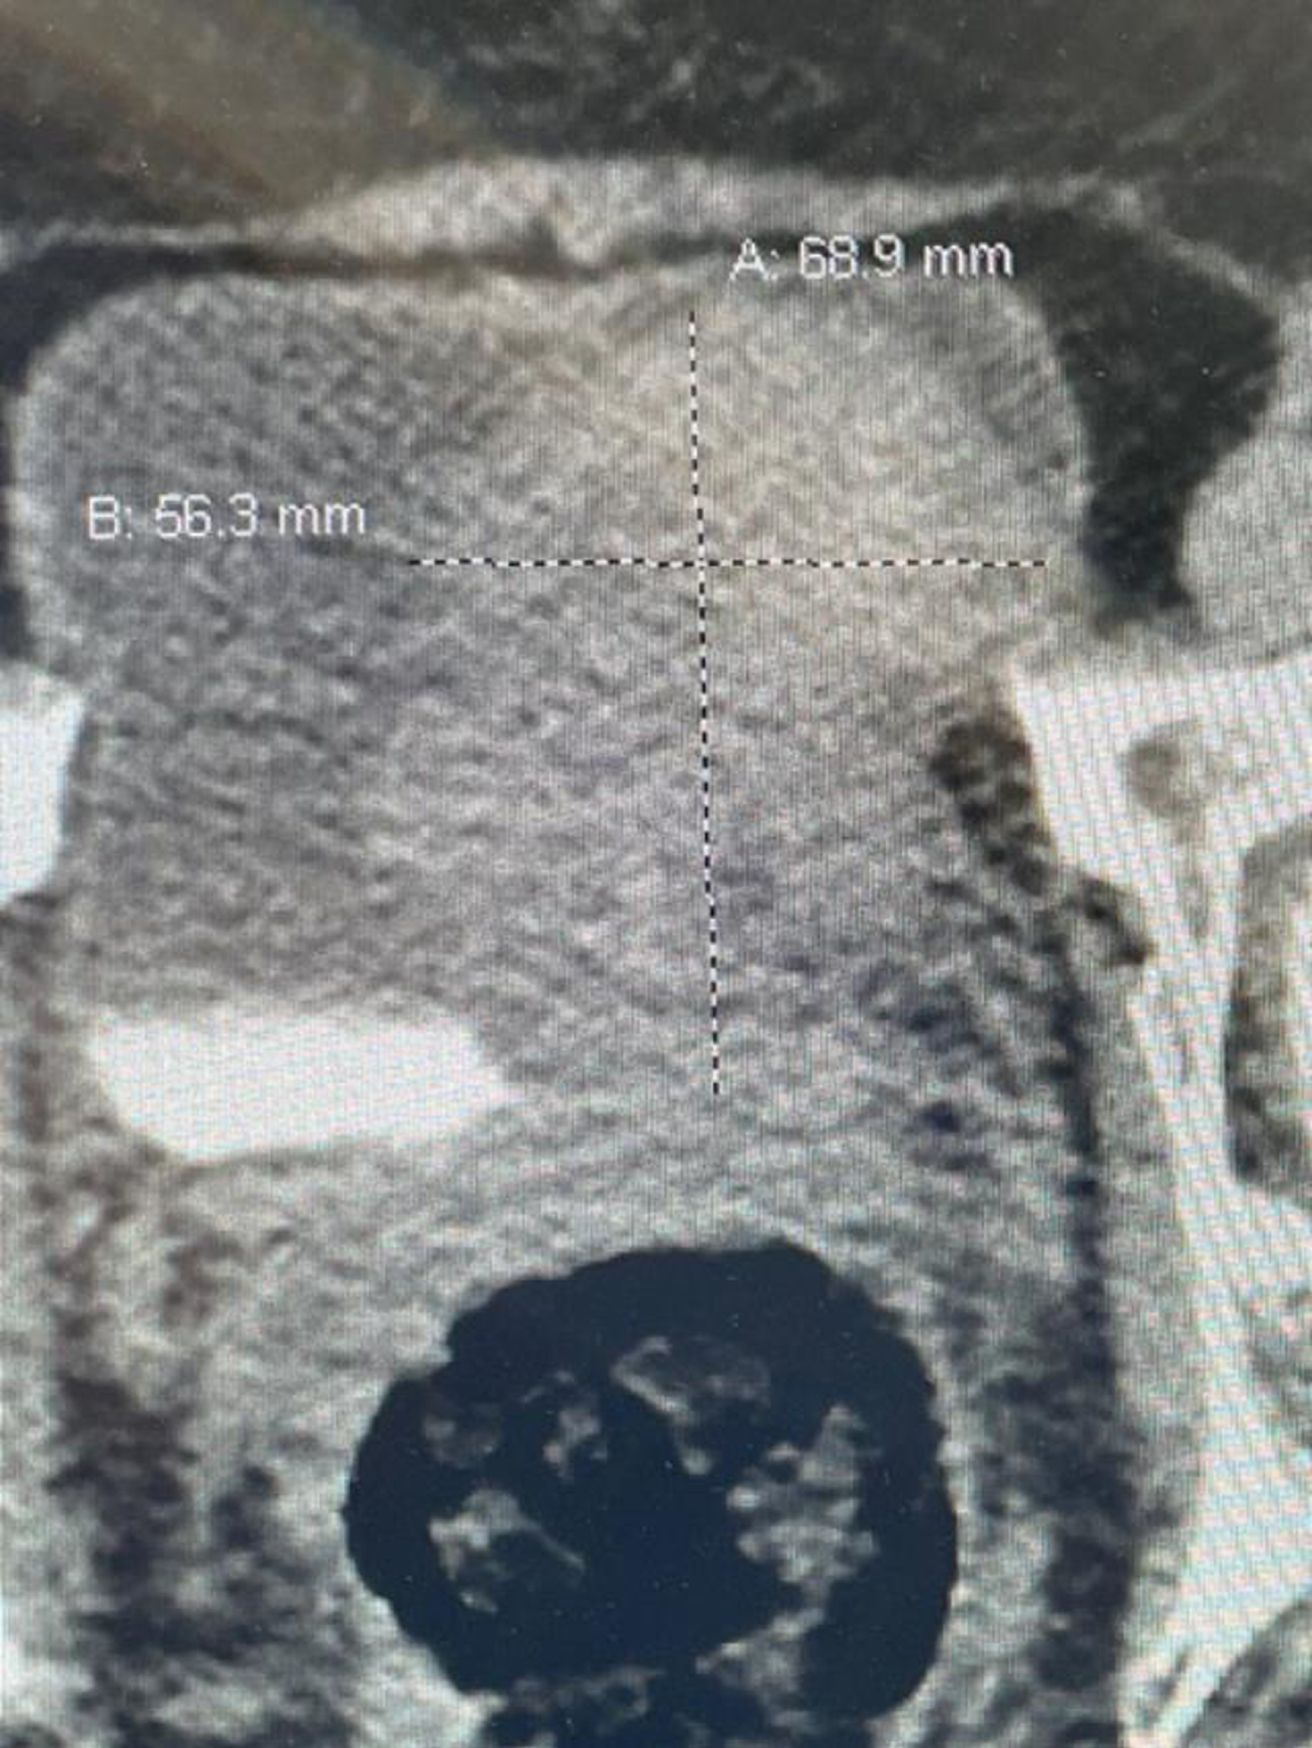 CT scan image indicating the large bladder tumor left wall.